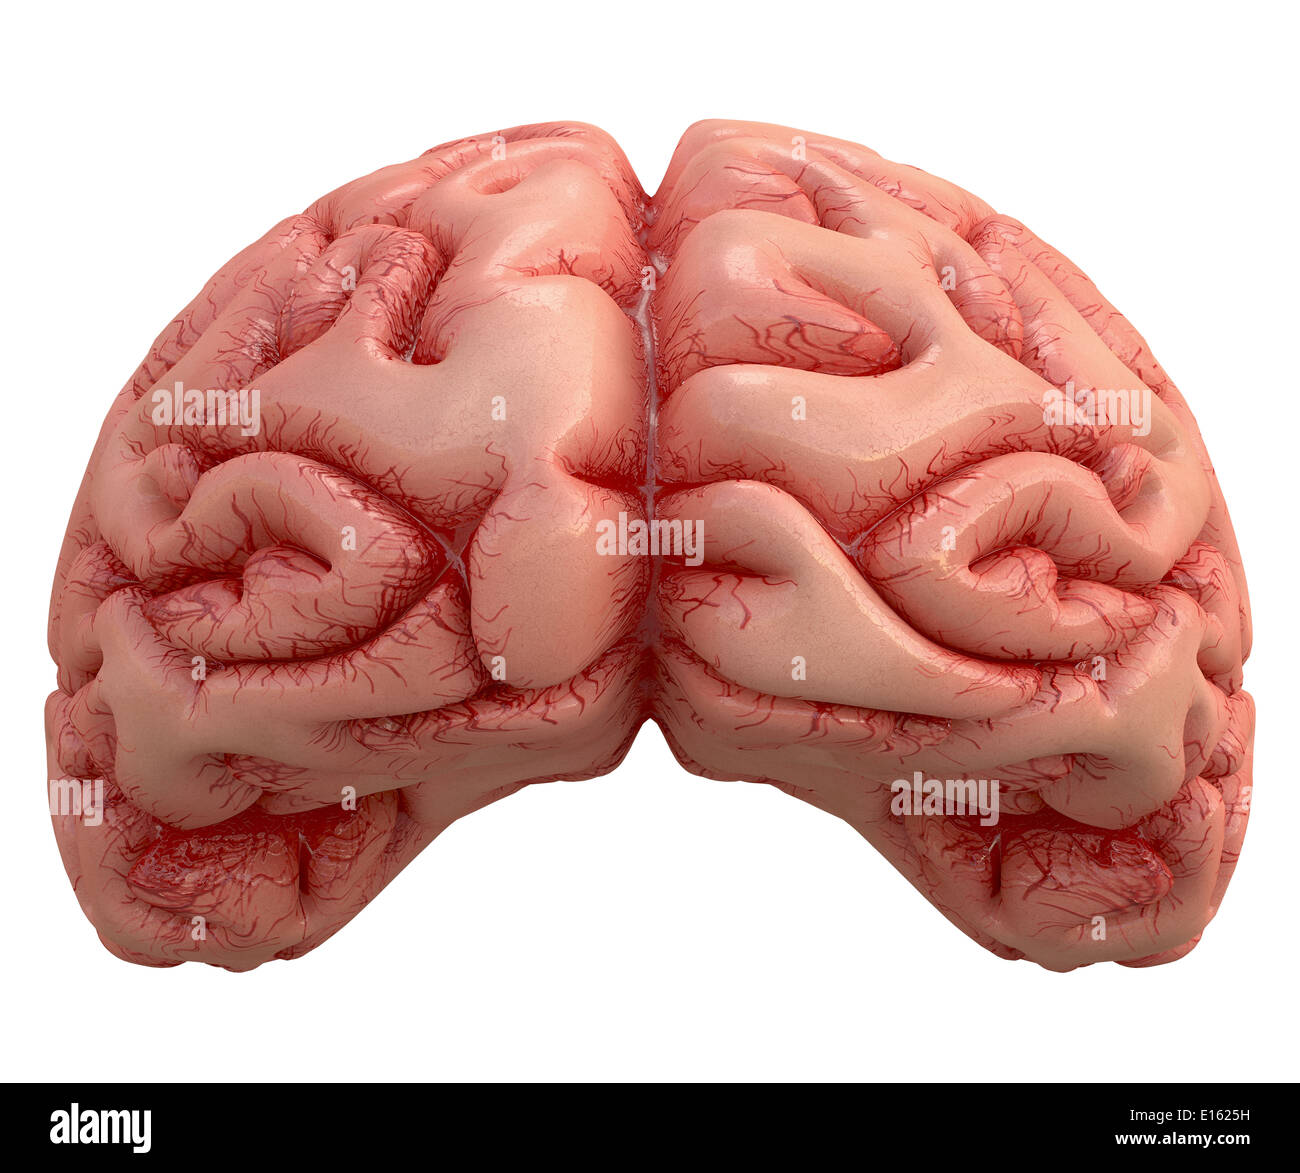 Human brain on white background with clipping path included. Stock Photo